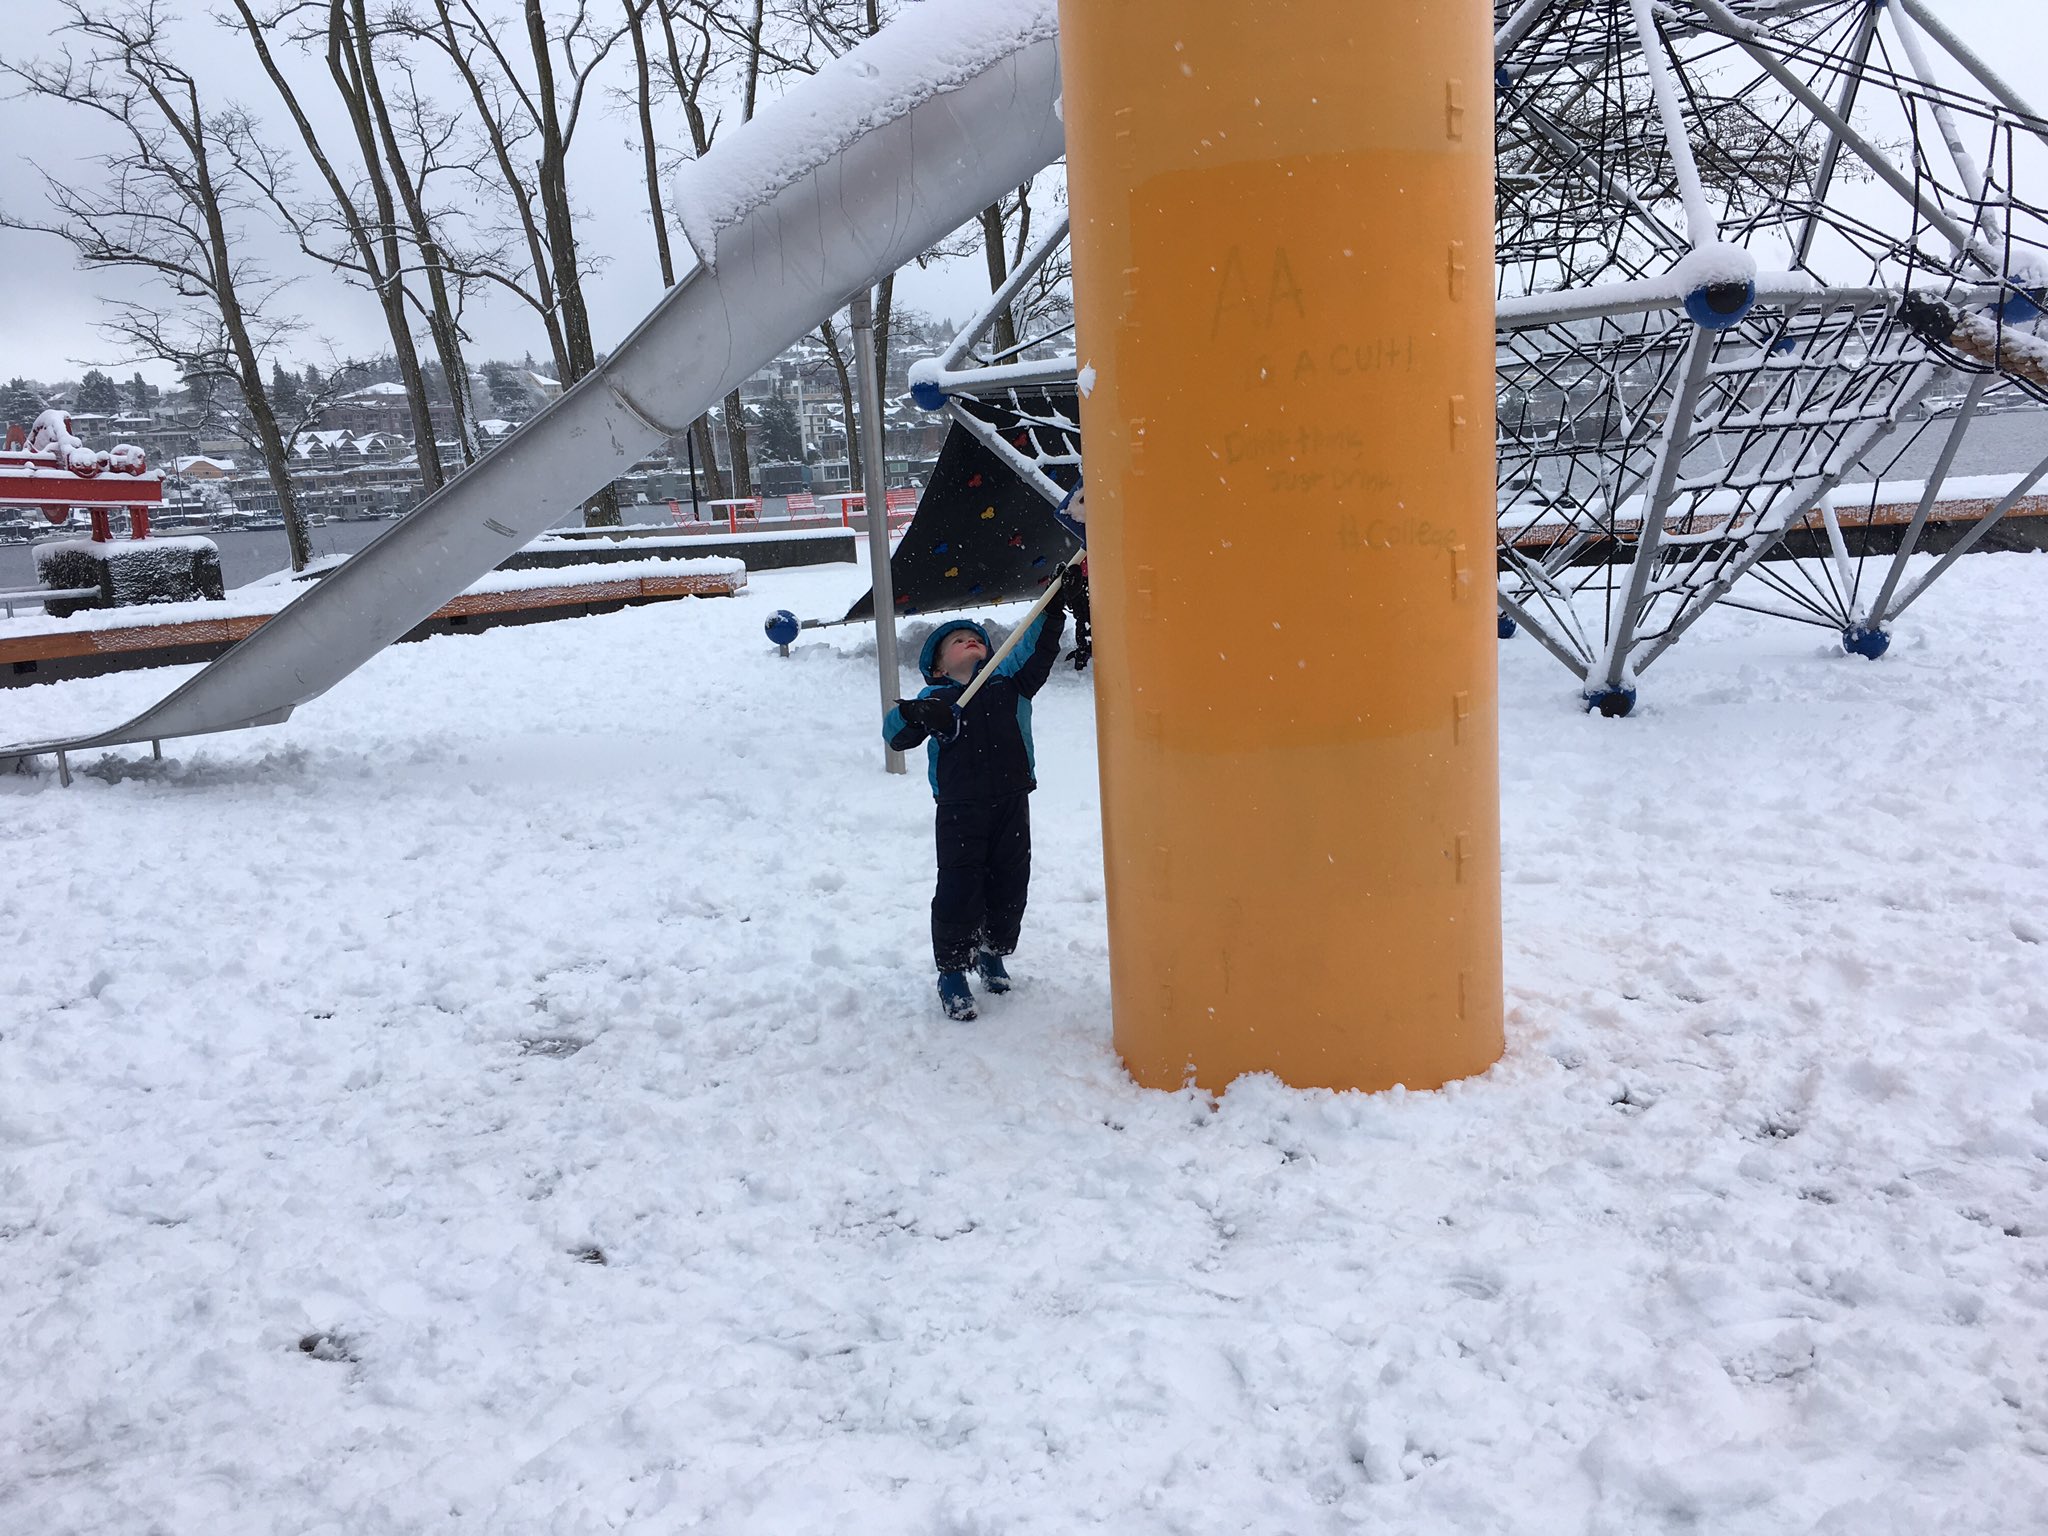 Julian uses a child's plastic snow shovel while partially obscured by a large yellow metal column.